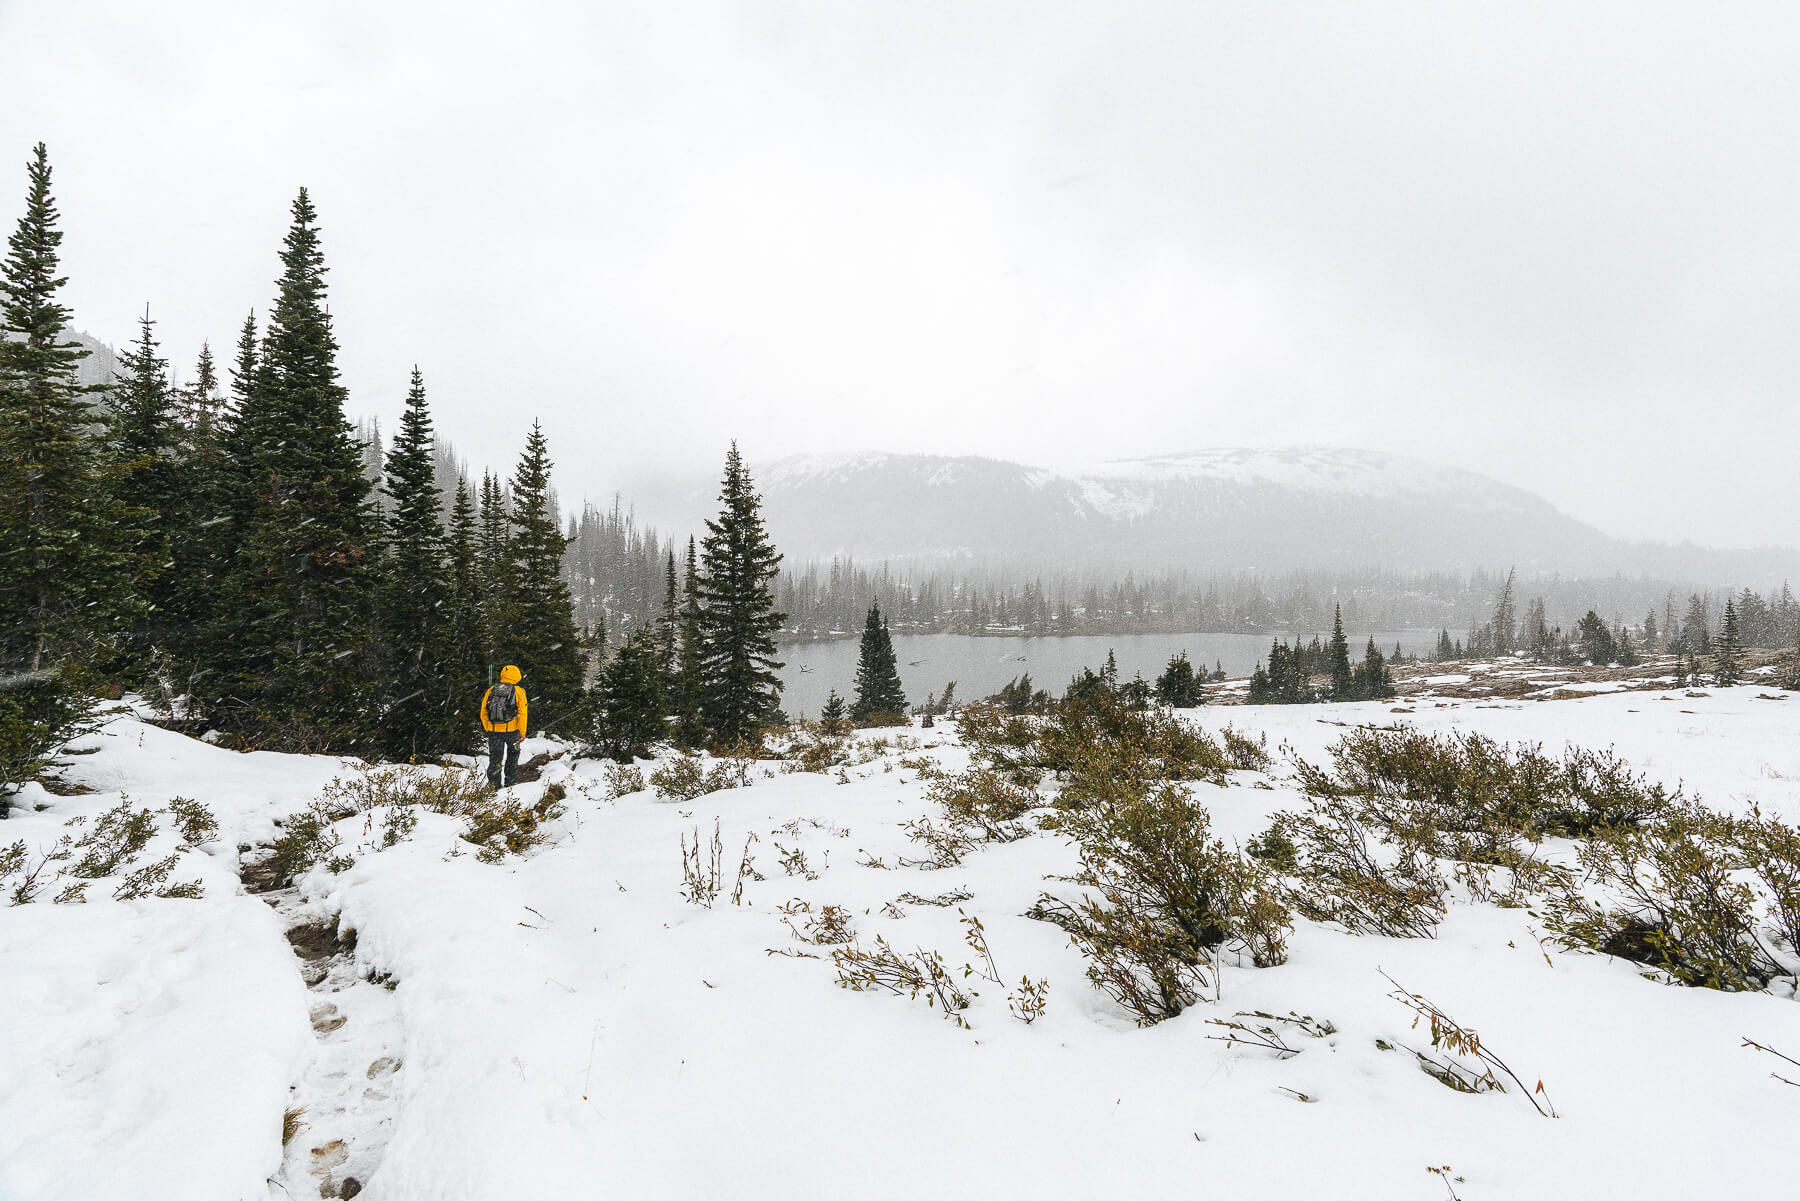 A Snowy Hike to Clyde Lake in the High Uintas